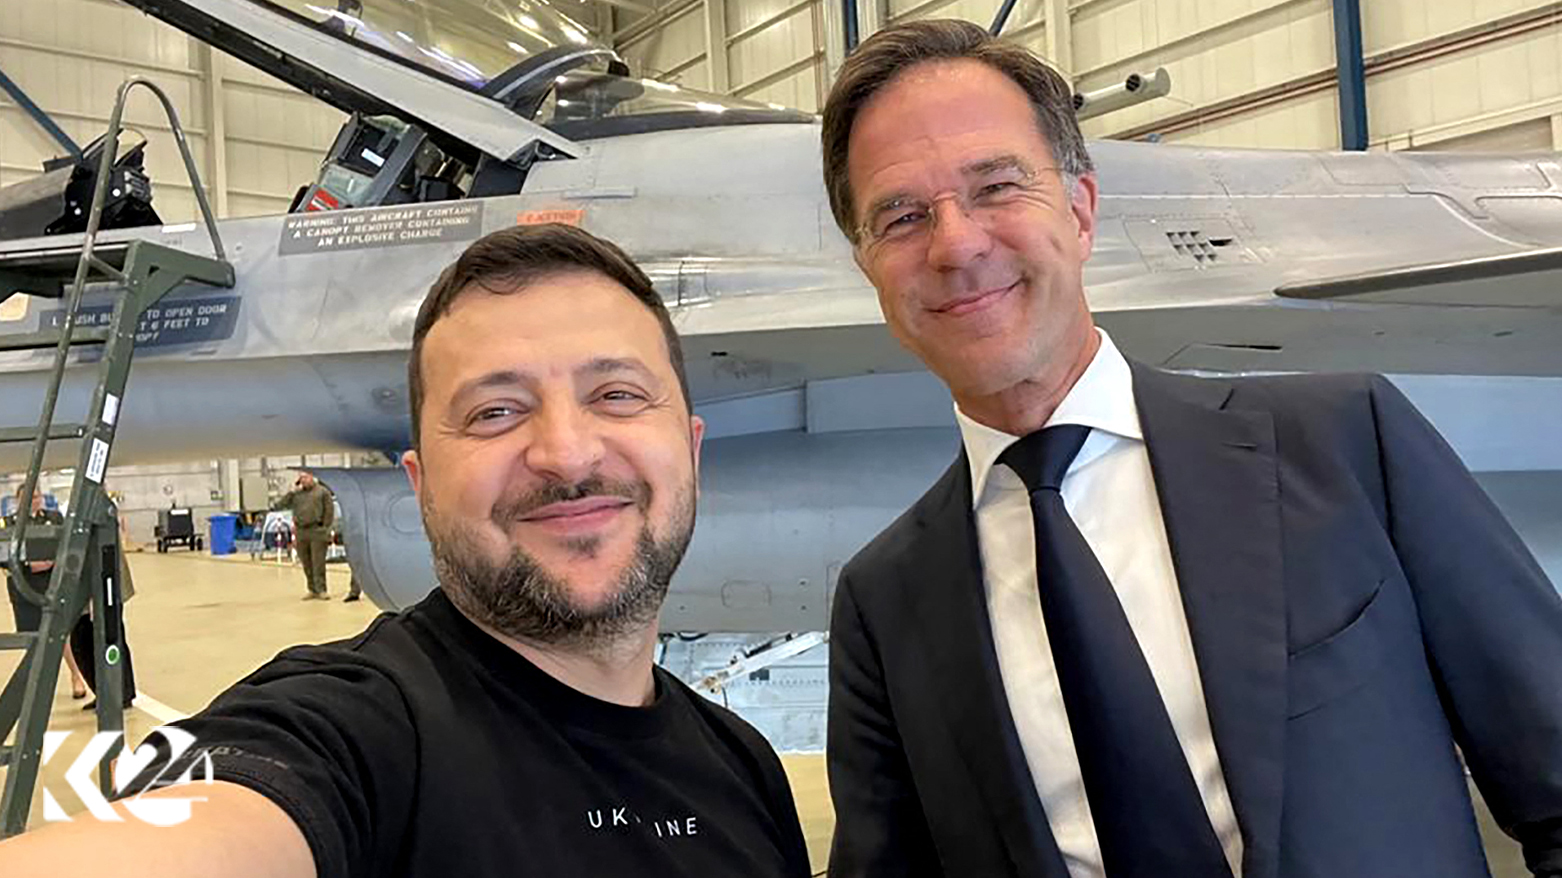 In this photograph released by the Ukrainian Presidential Press Service on Sunday, President Volodymyr Zelensky takes a selfie with Dutch Prime Minister Mark Rutte at Eindhoven Air Base in the Netherlands. (Photo: AFP/Getty Images)